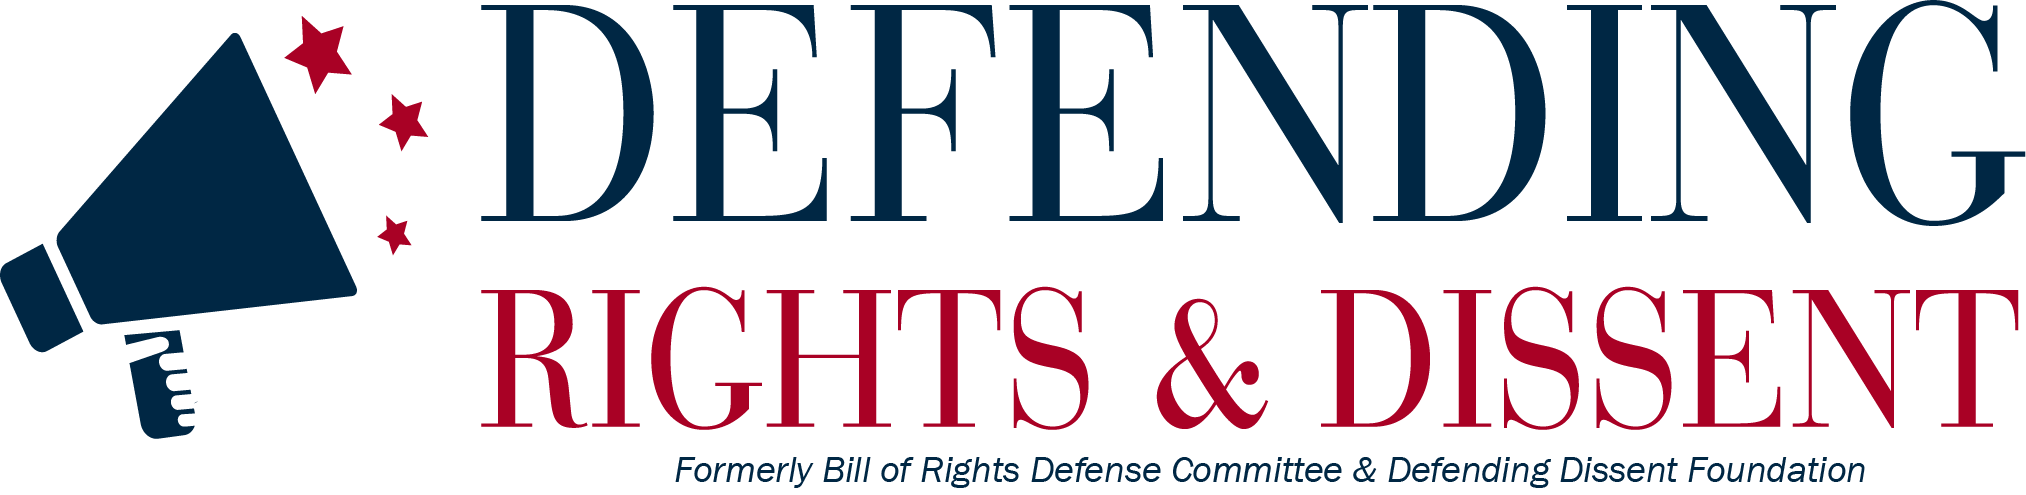 DEFENDING RIGHTS AND DISSENT